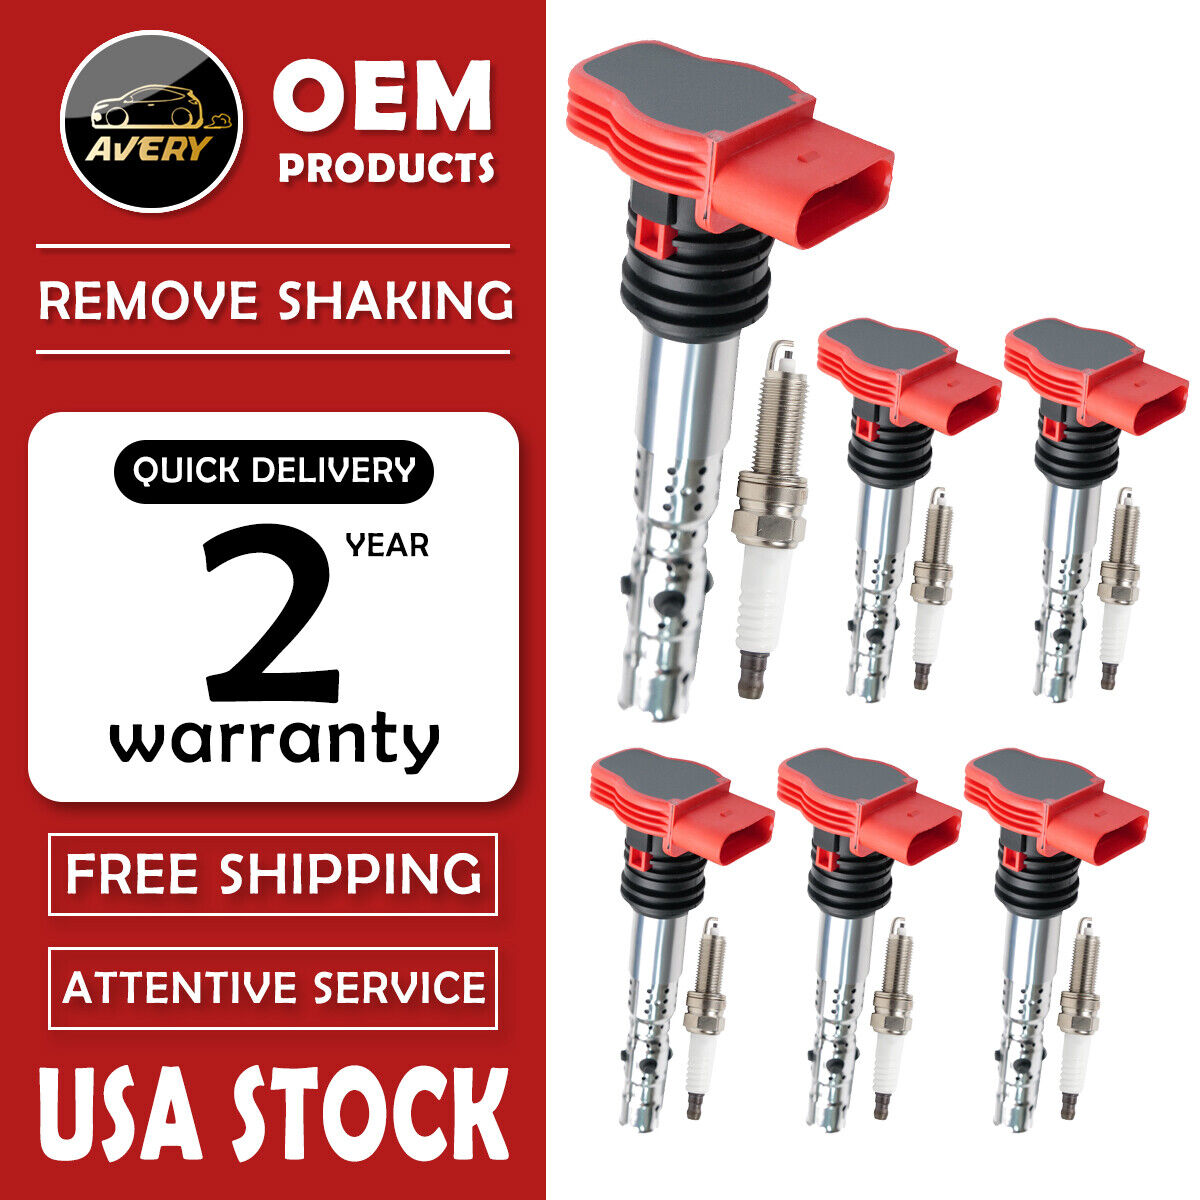 6X Ignition Coils + 6X spark plugs Pack for Audi A4 A8 Q5 Q7 R8 S4 VW  UF529